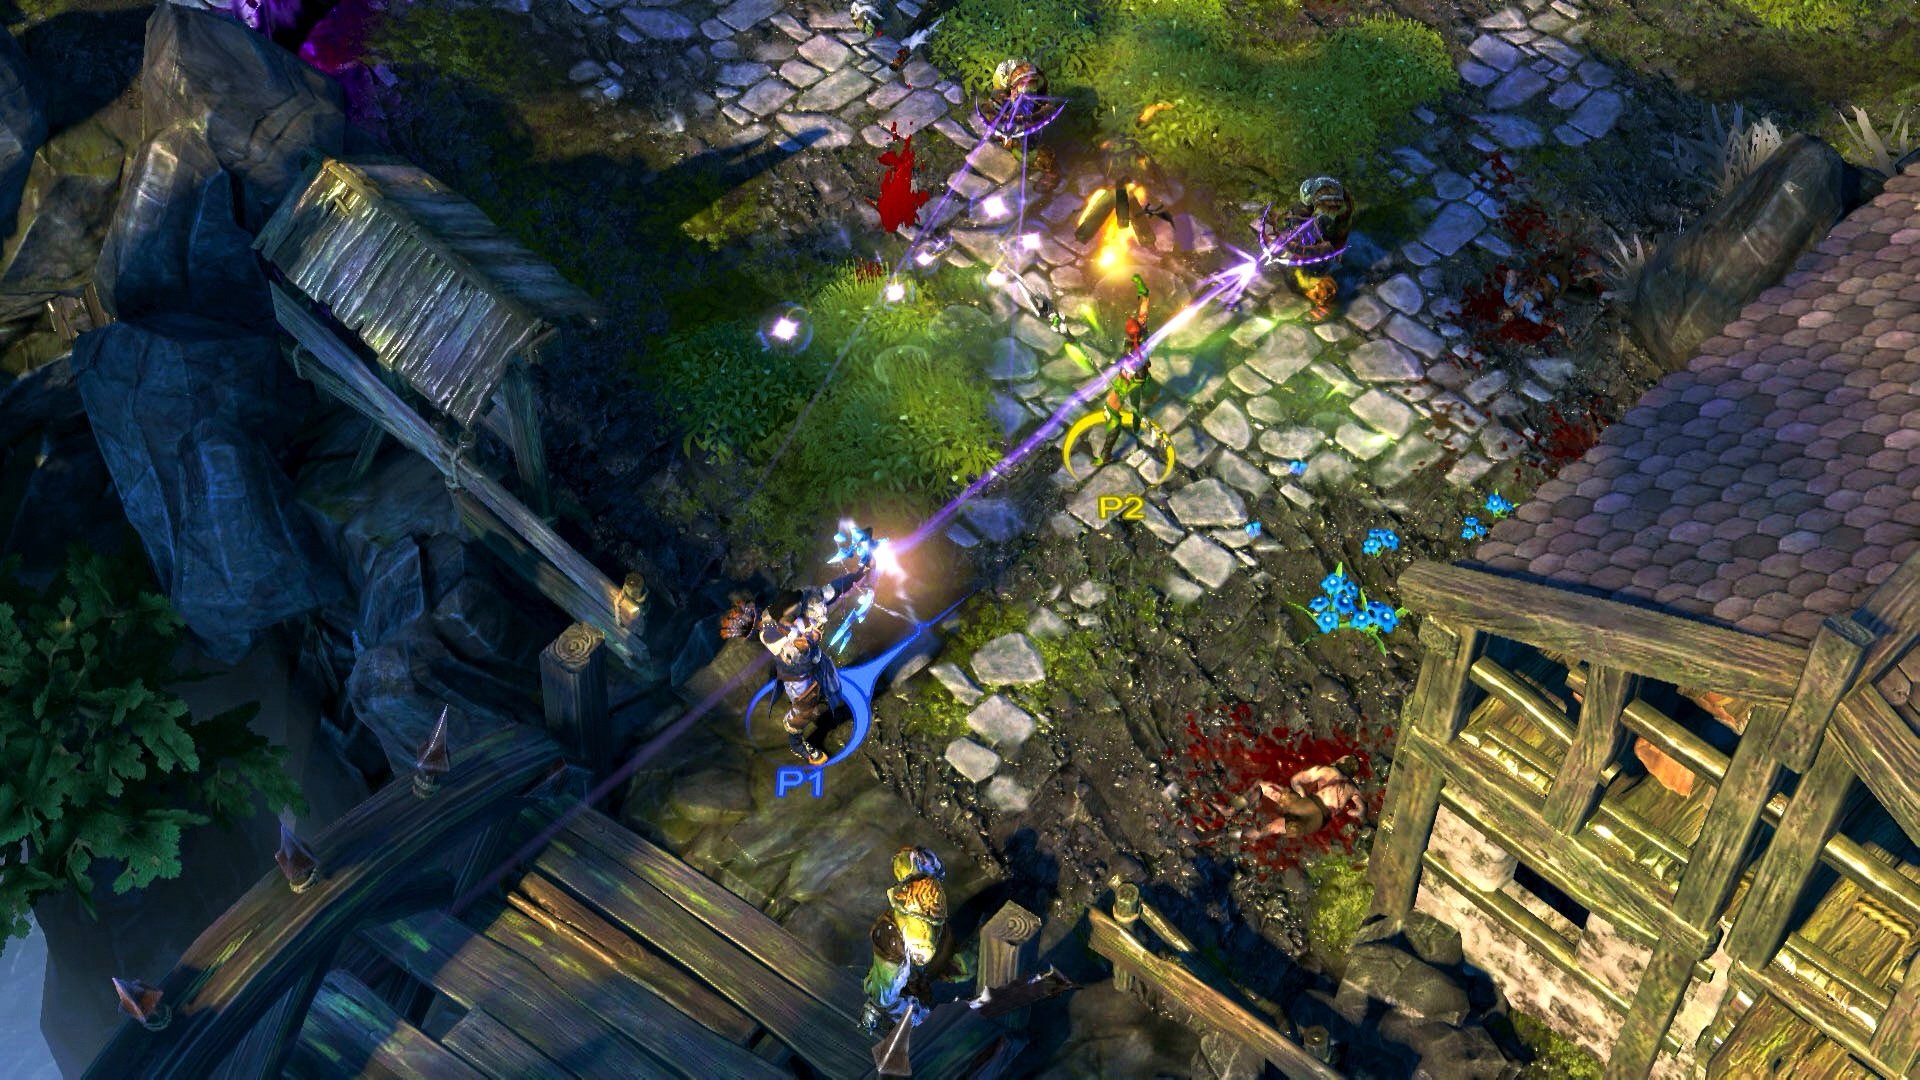 Deep Silver Announces Sacred 3 Arrives This Summer, Brings Action-RPG to PC and Consoles!